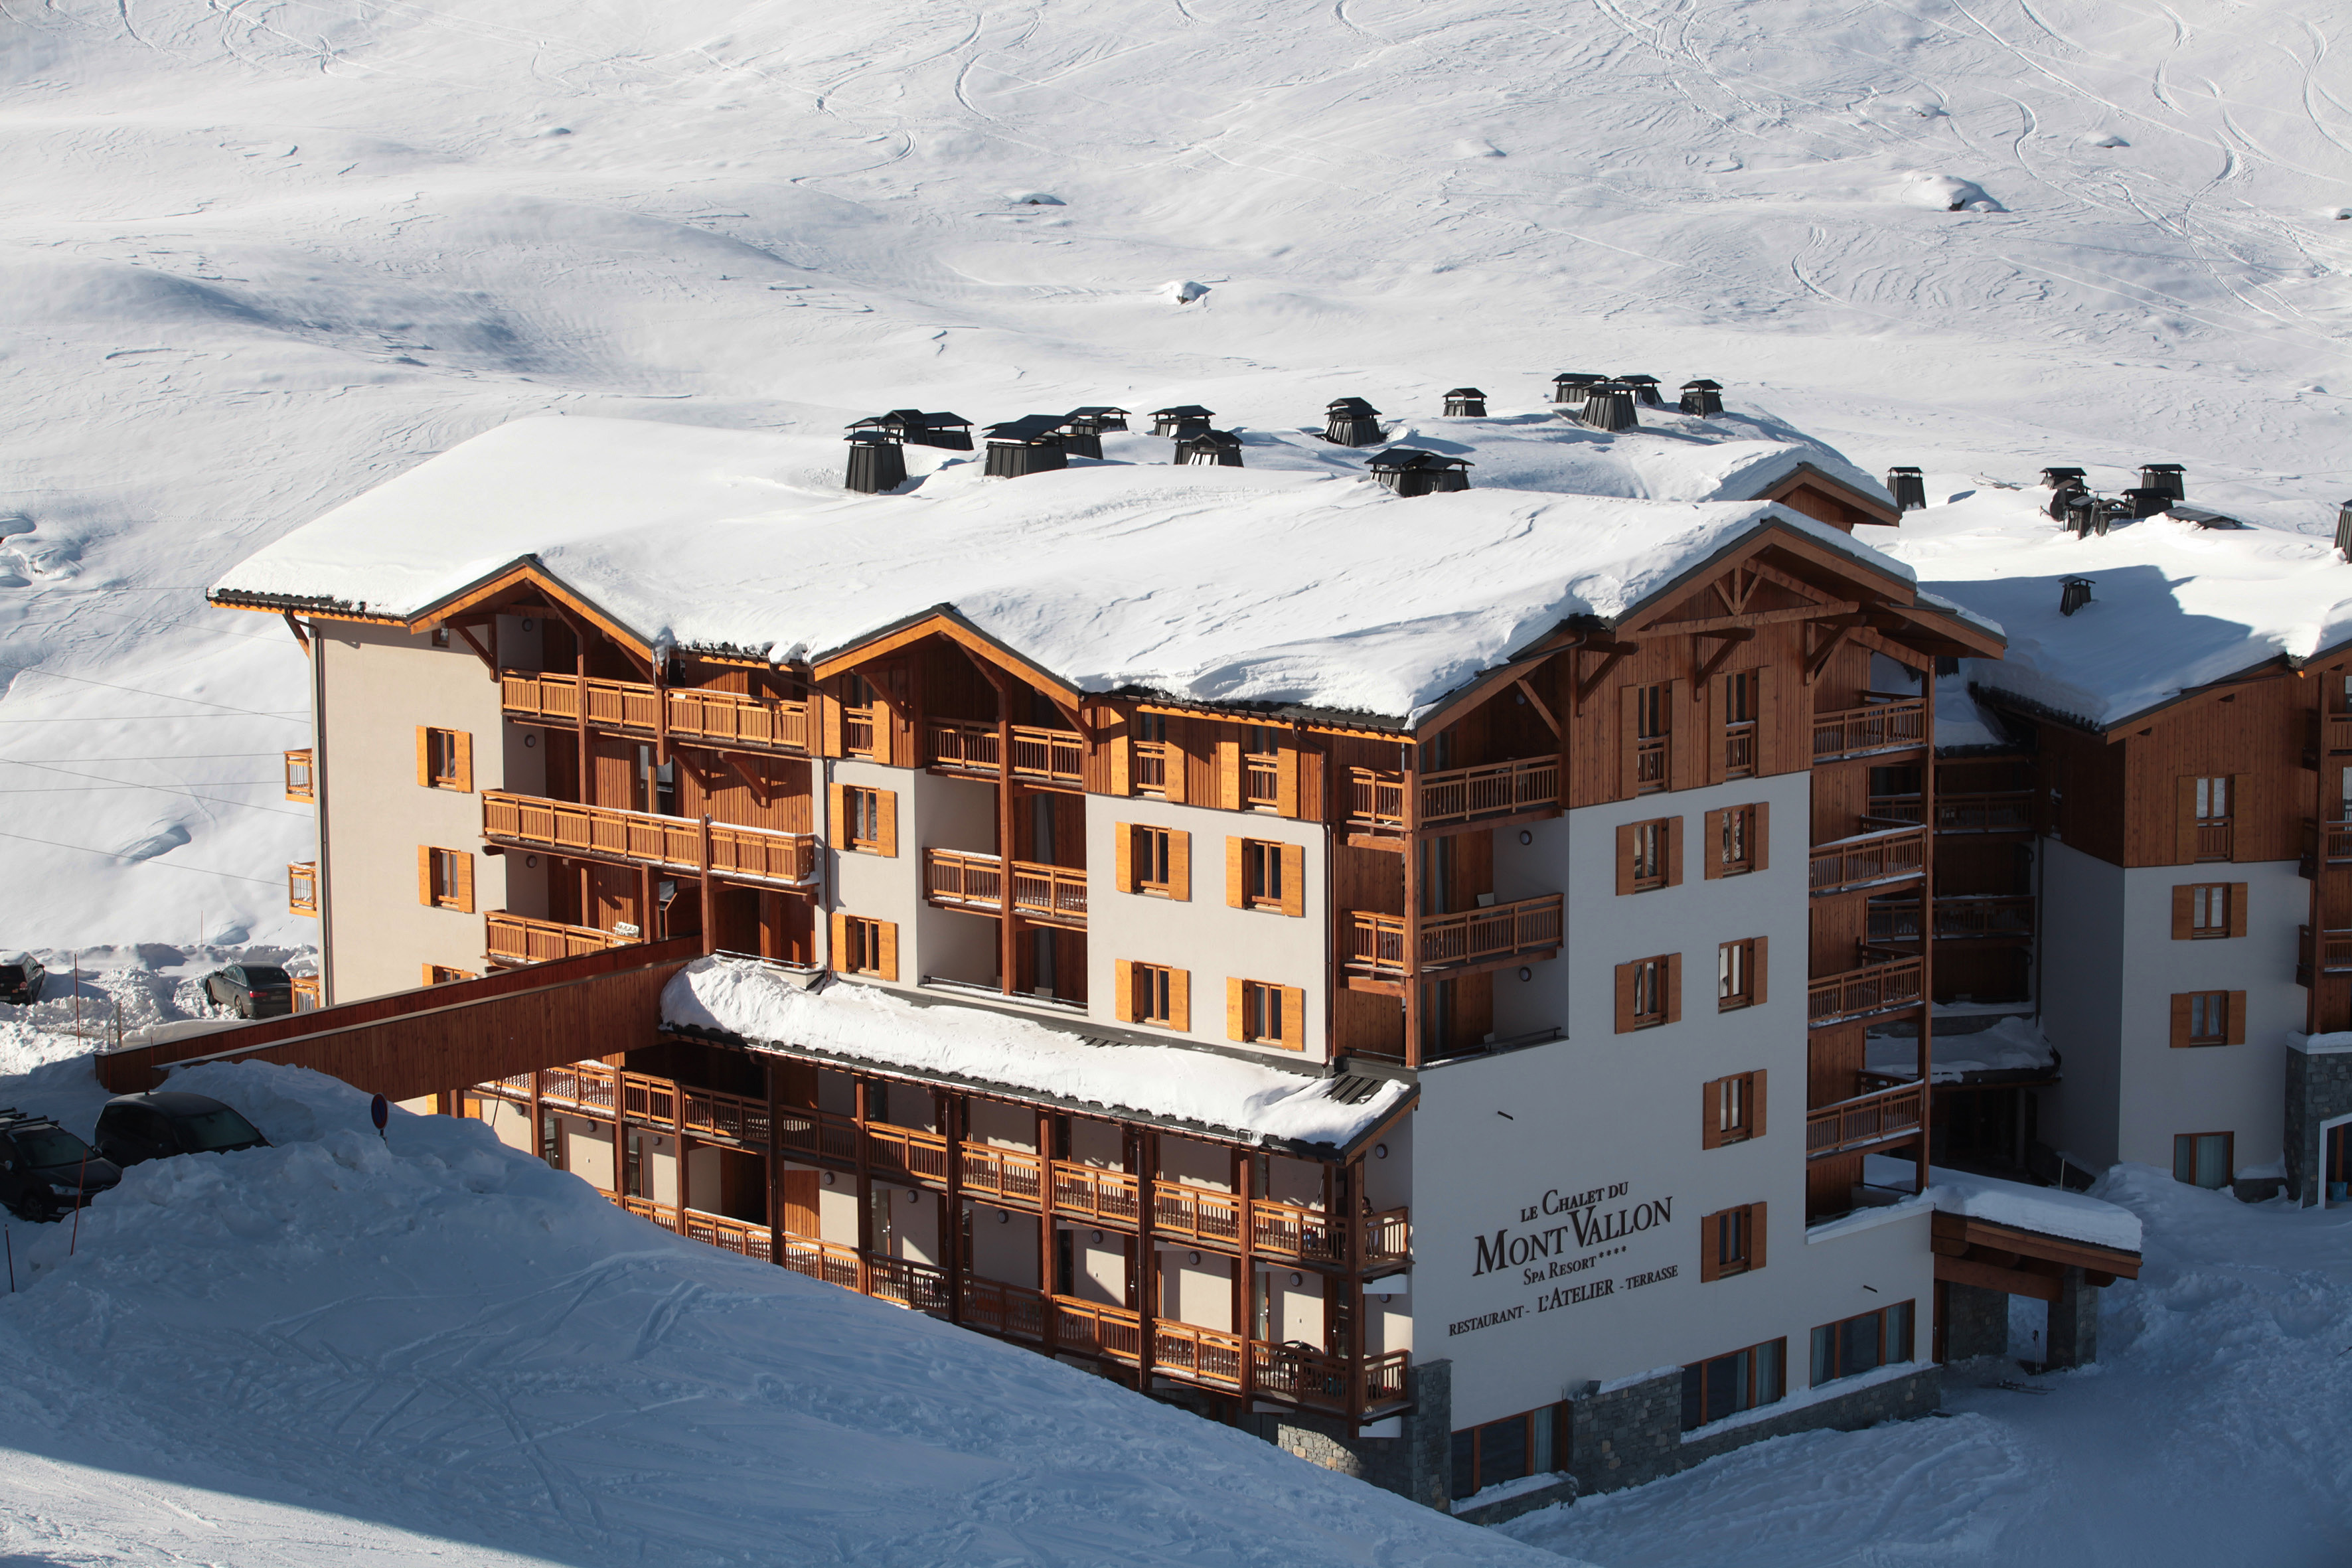 Selection Of Hotels Your Ski Holiday Les Menuires